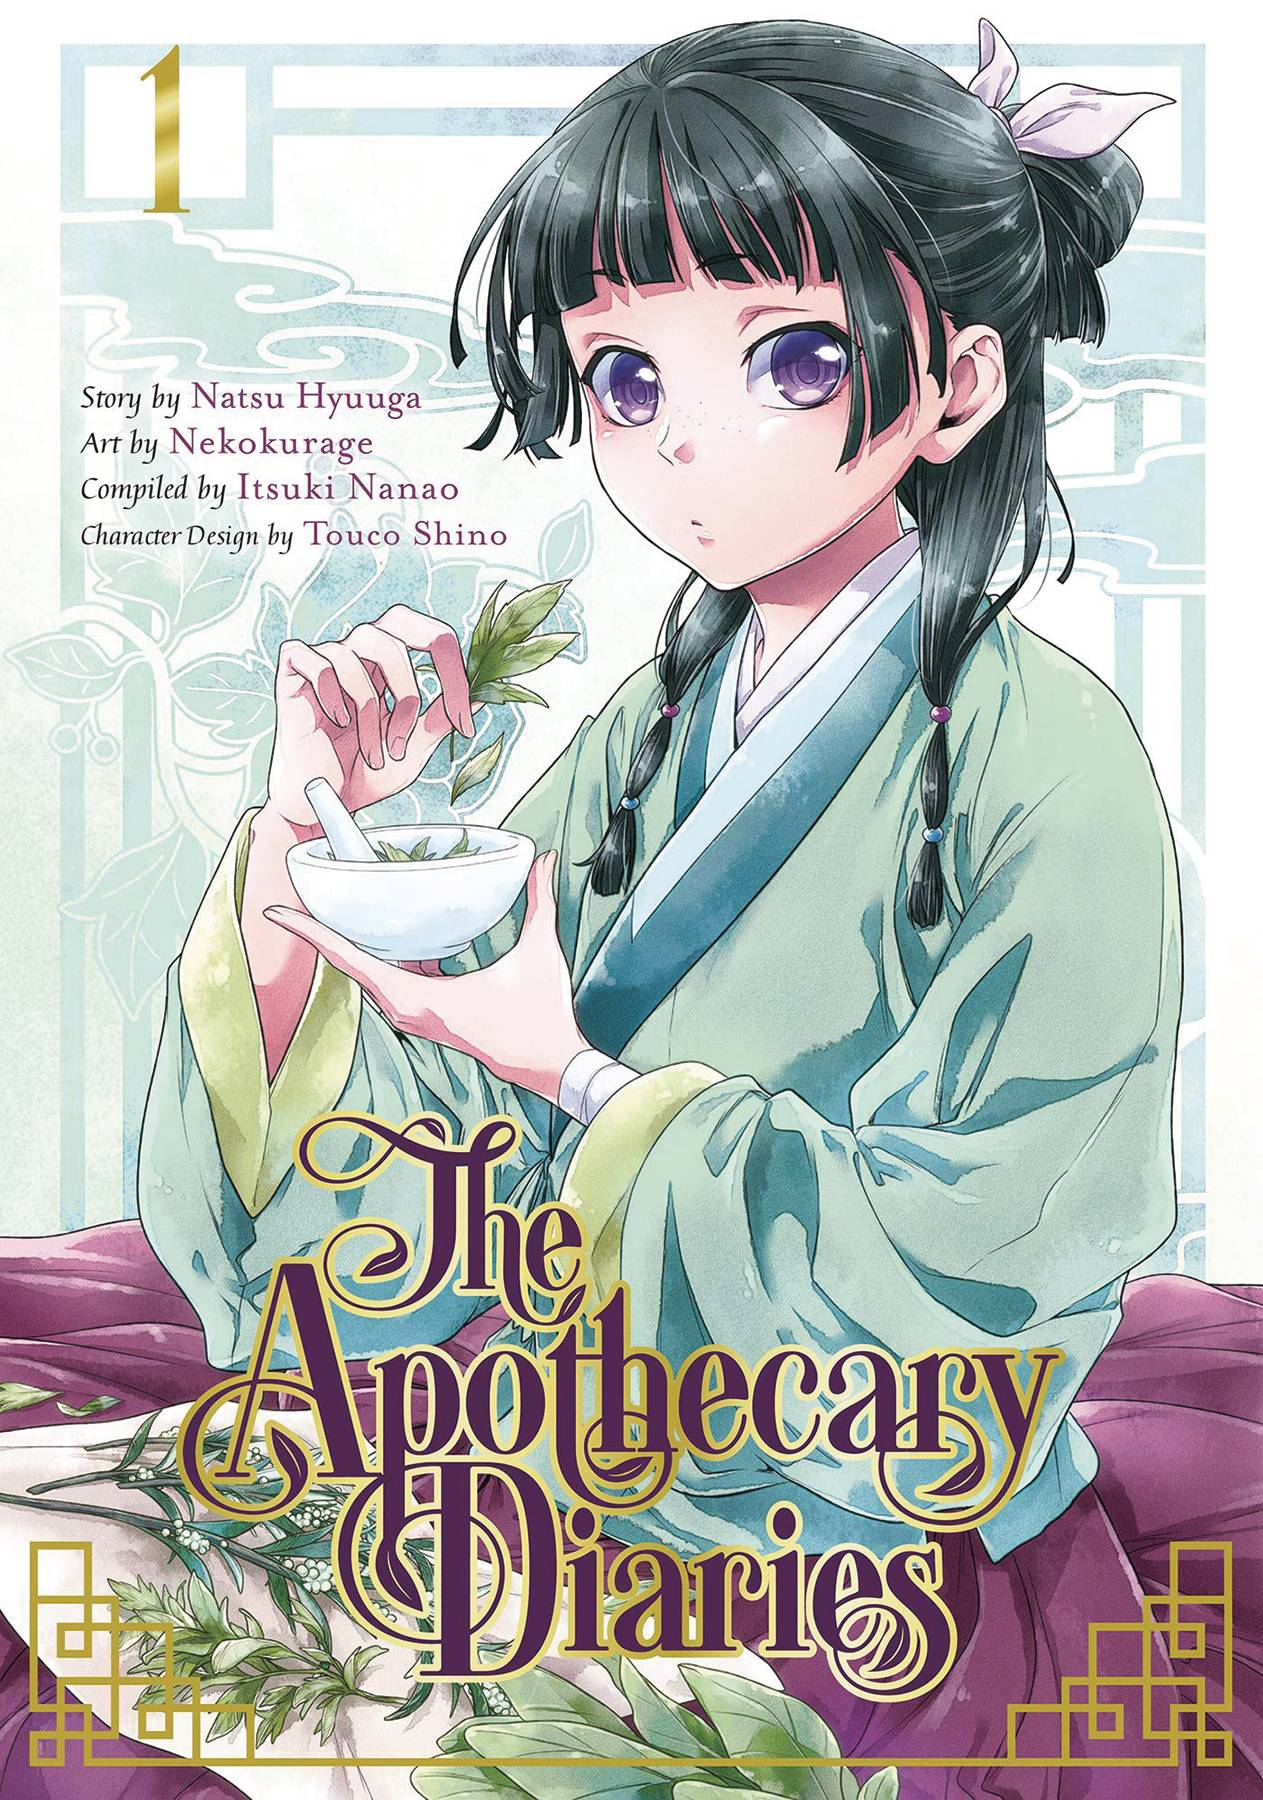 A wide-eyed girl with shoulderlength black hair holds a pestle and mortar containing herbs. She is wearing an unpatterned robe in shades of soft green.